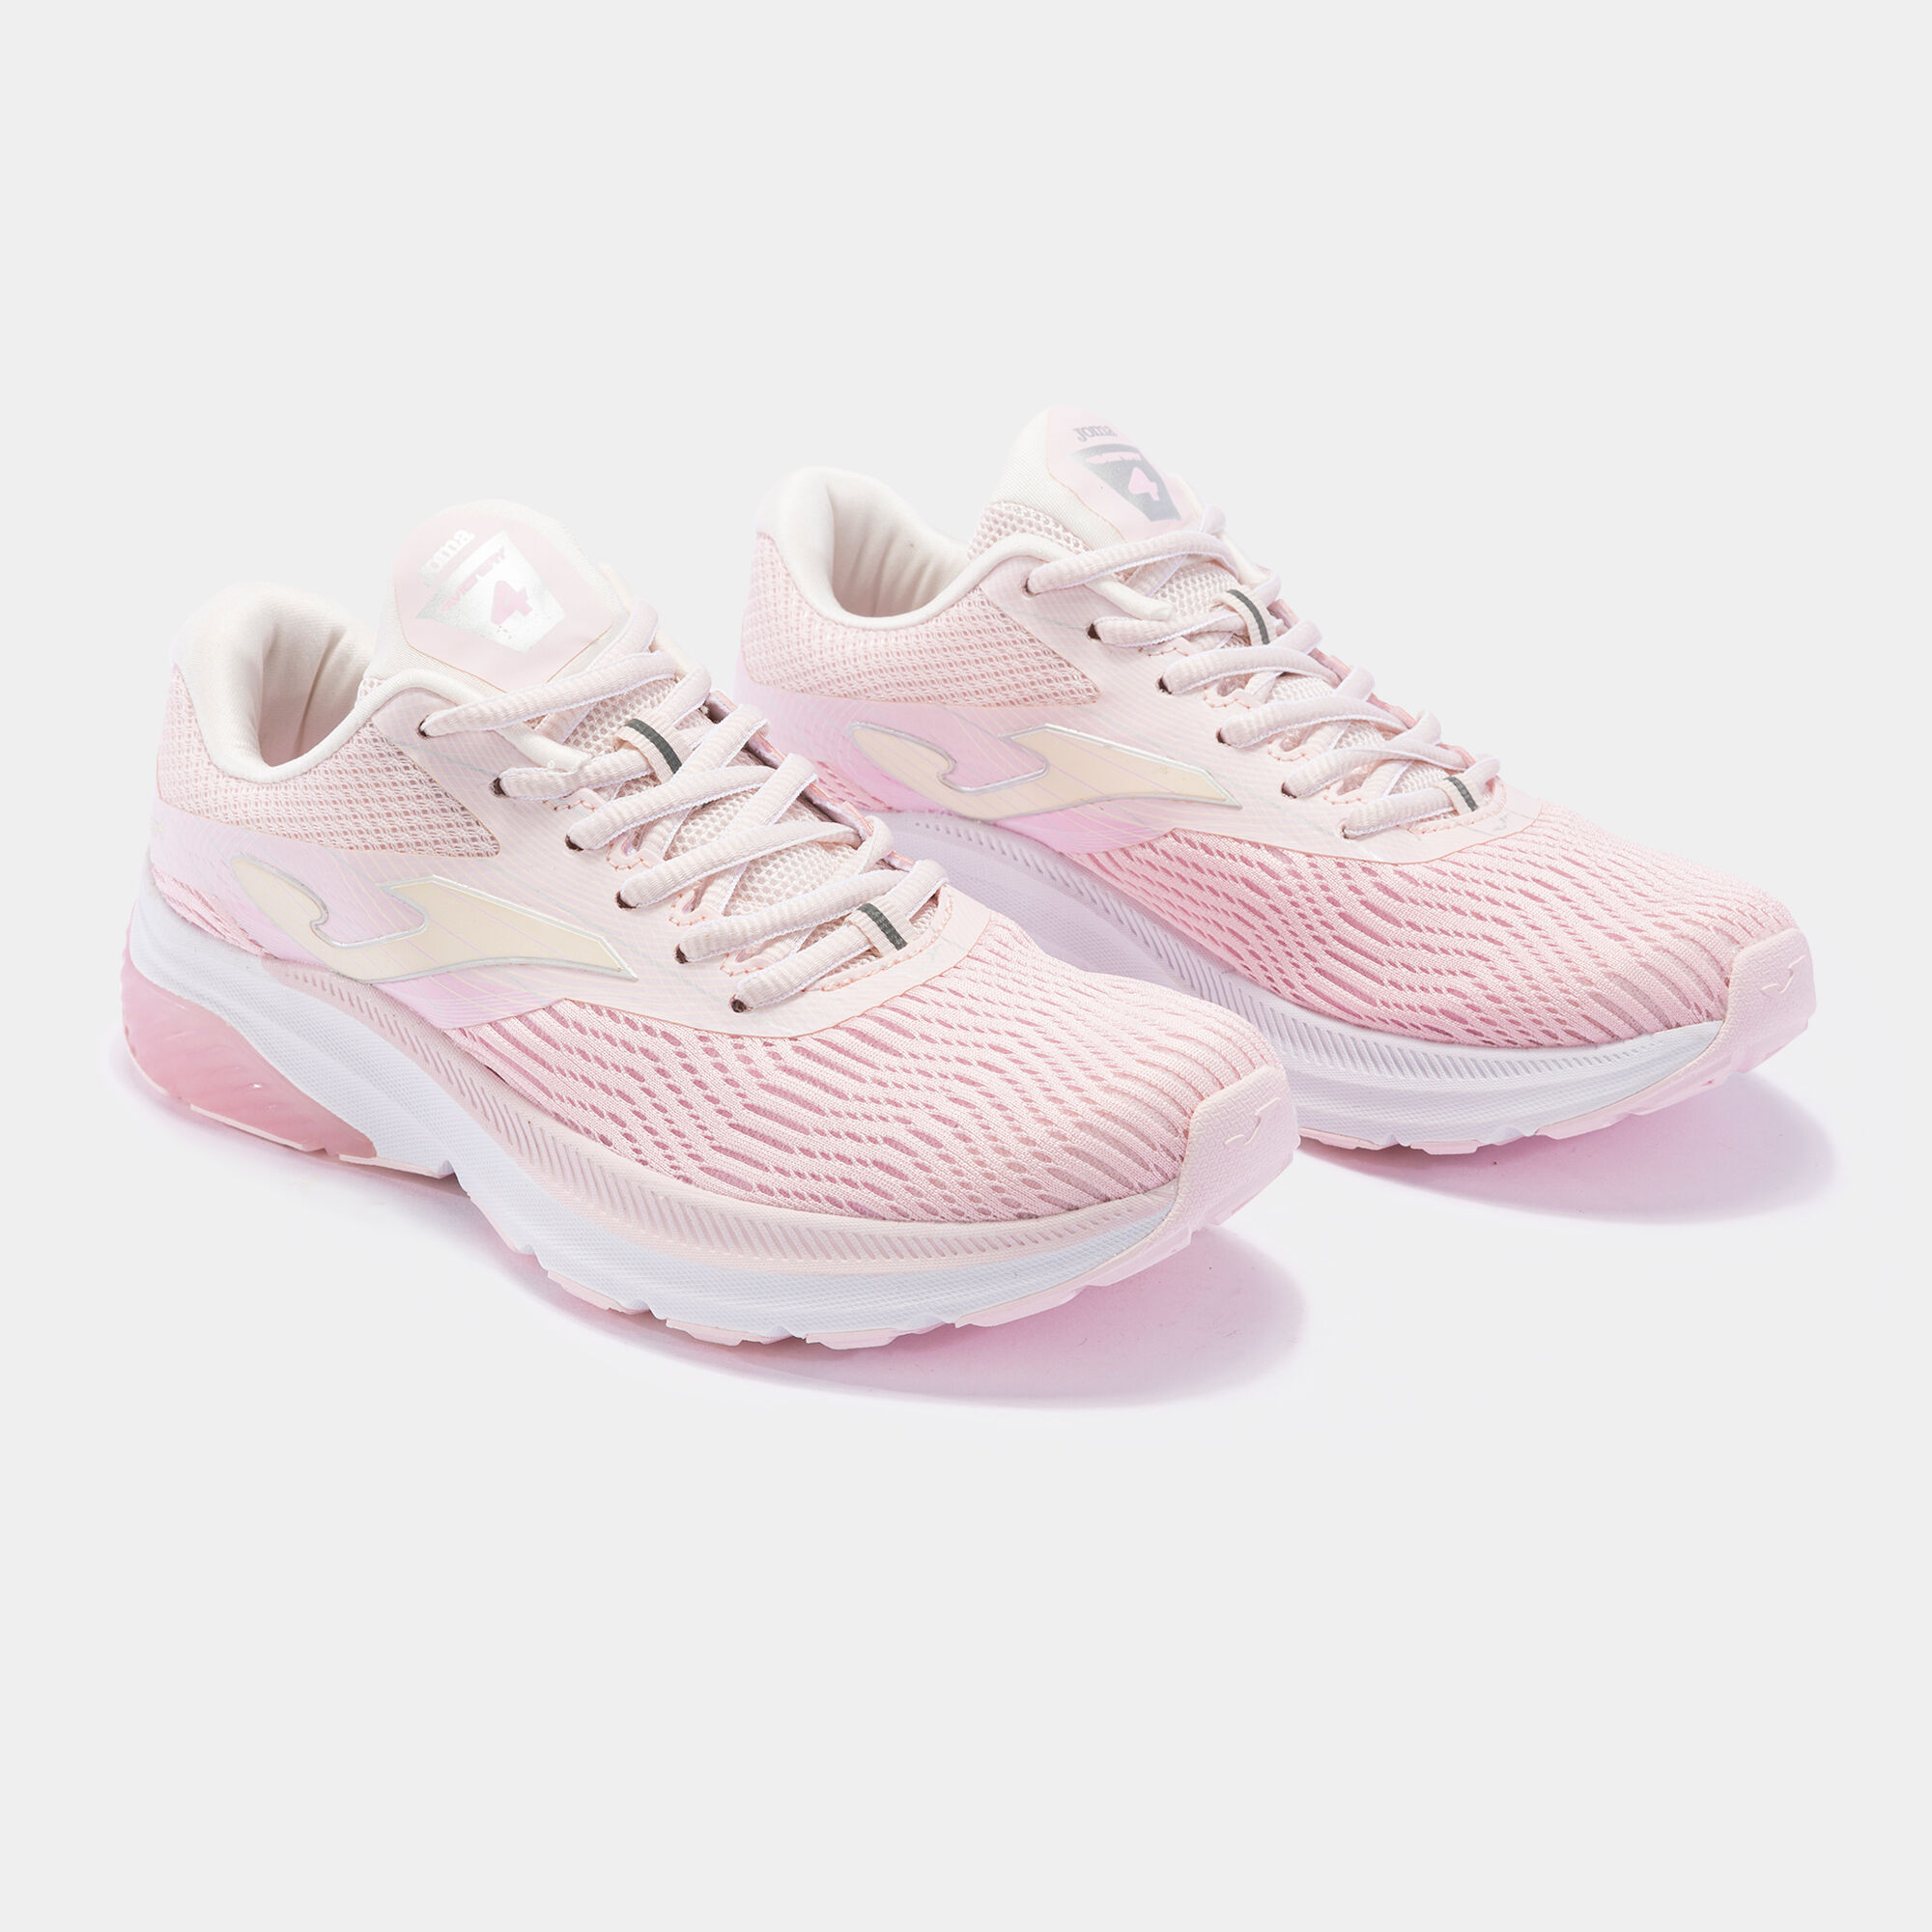 CHAUSSURES RUNNING VICTORY 22 FEMME ROSE BEIGE